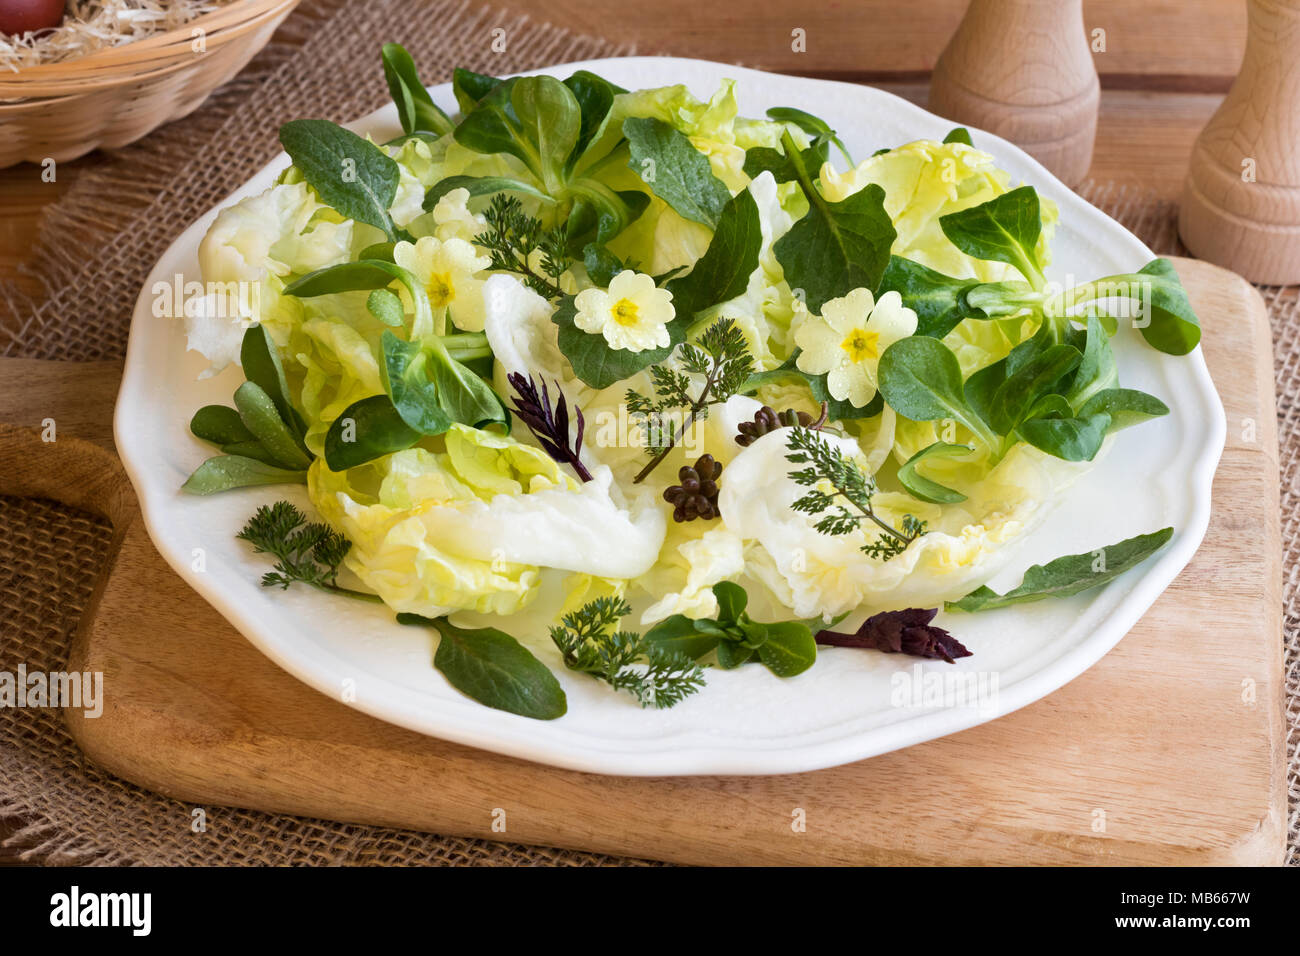 Spring salad with primula flowers, young nipplewort leaves and other wild edible plants Stock Photo